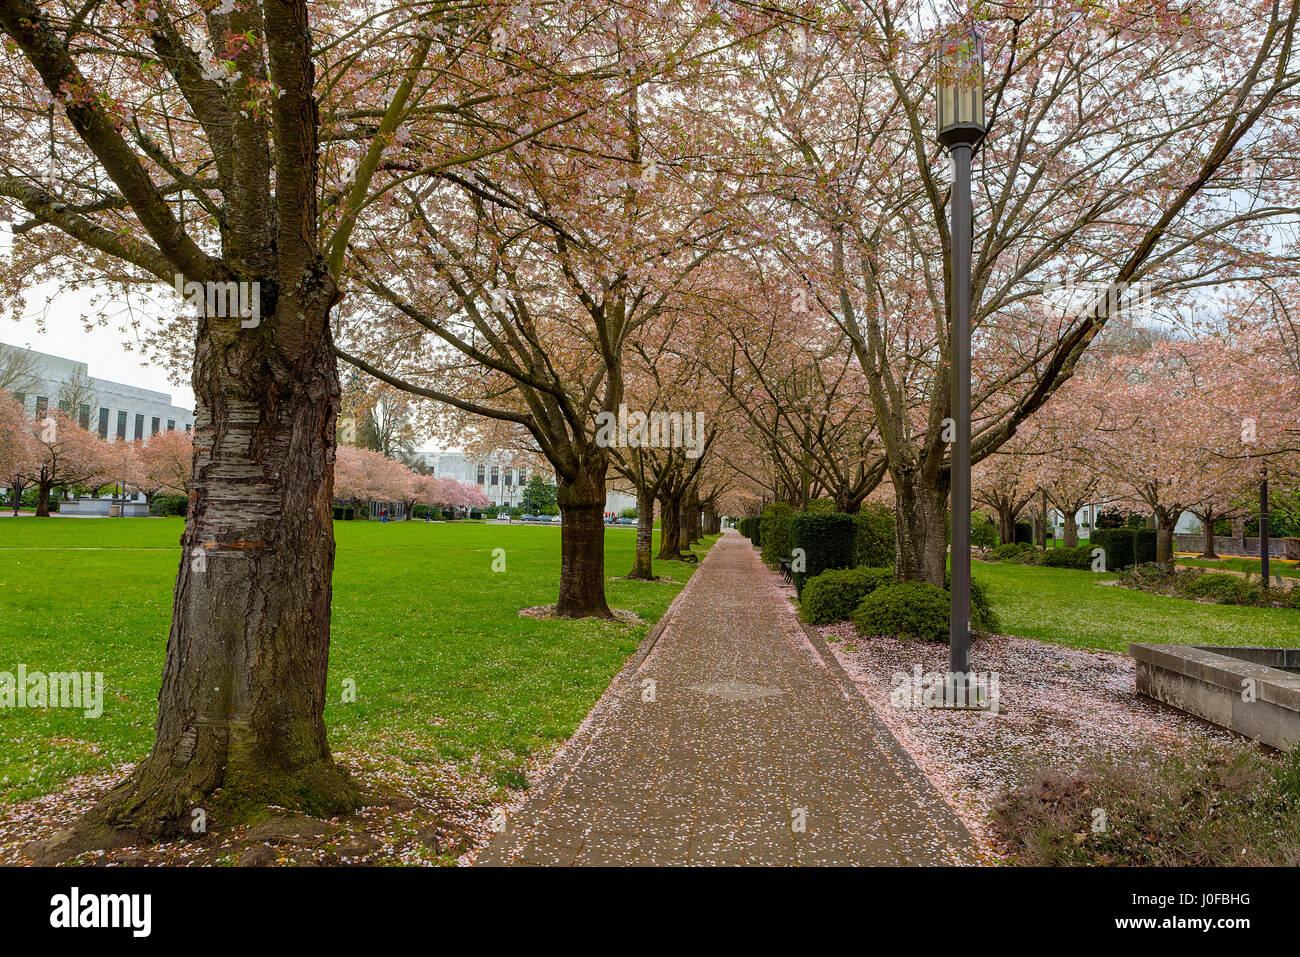 Cherry Blossom Trees by lamp posts along walking path in downtown park